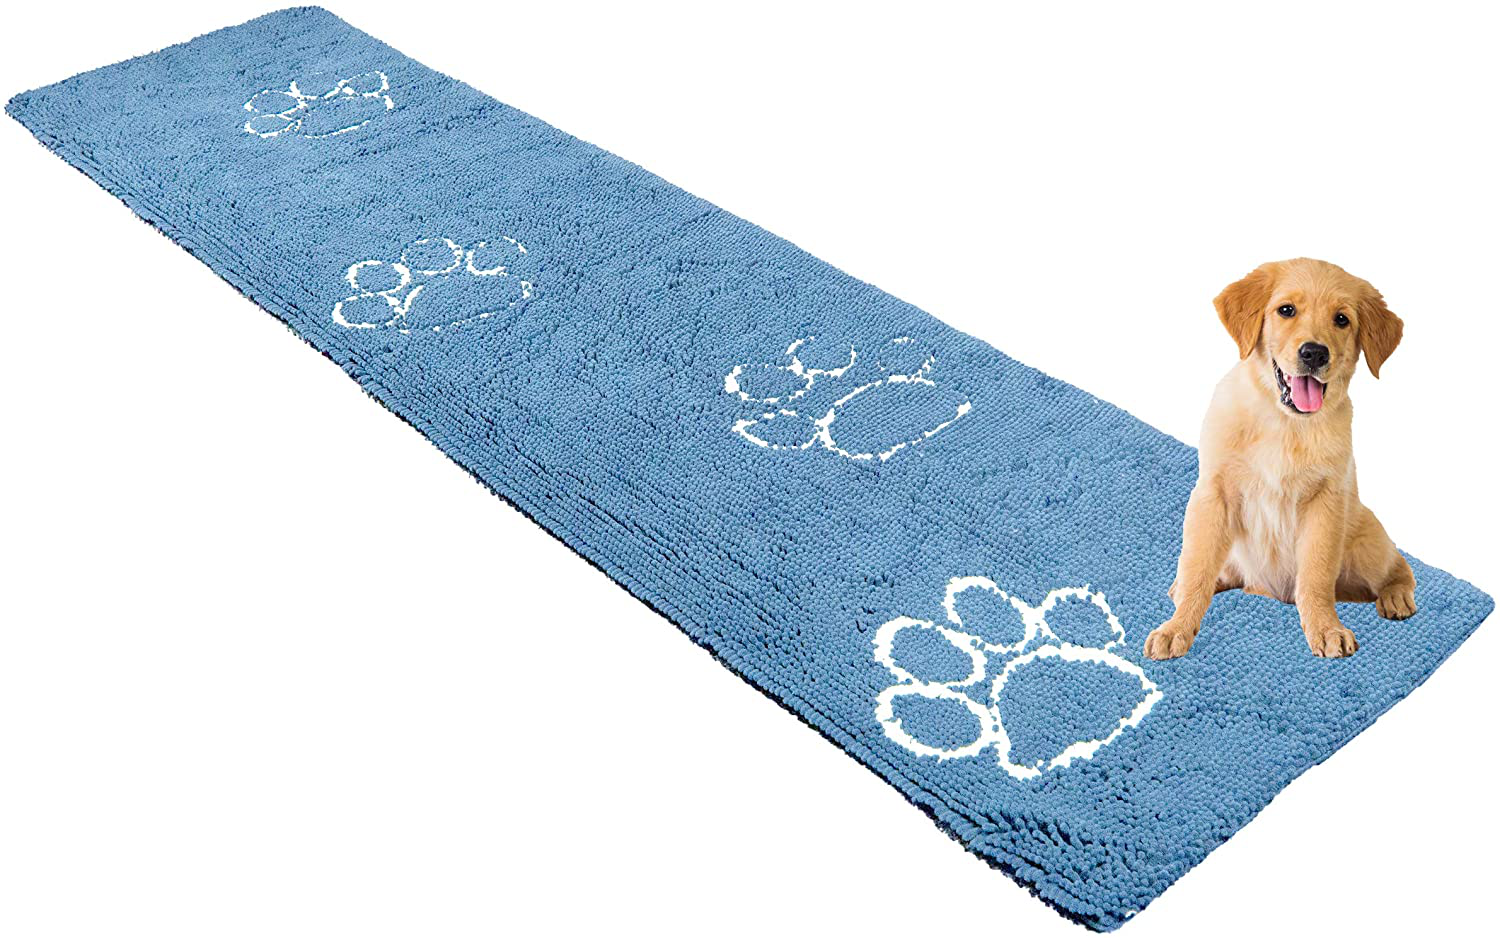 My Doggy Place - Ultra Absorbent Microfiber Dog Door Mat, Durable, Quick Drying, Washable, Prevent Mud Dirt, Keep Your House Clean (Faded Denim W/Paw Print, Hallway Runner) - 8' X 2' Feet